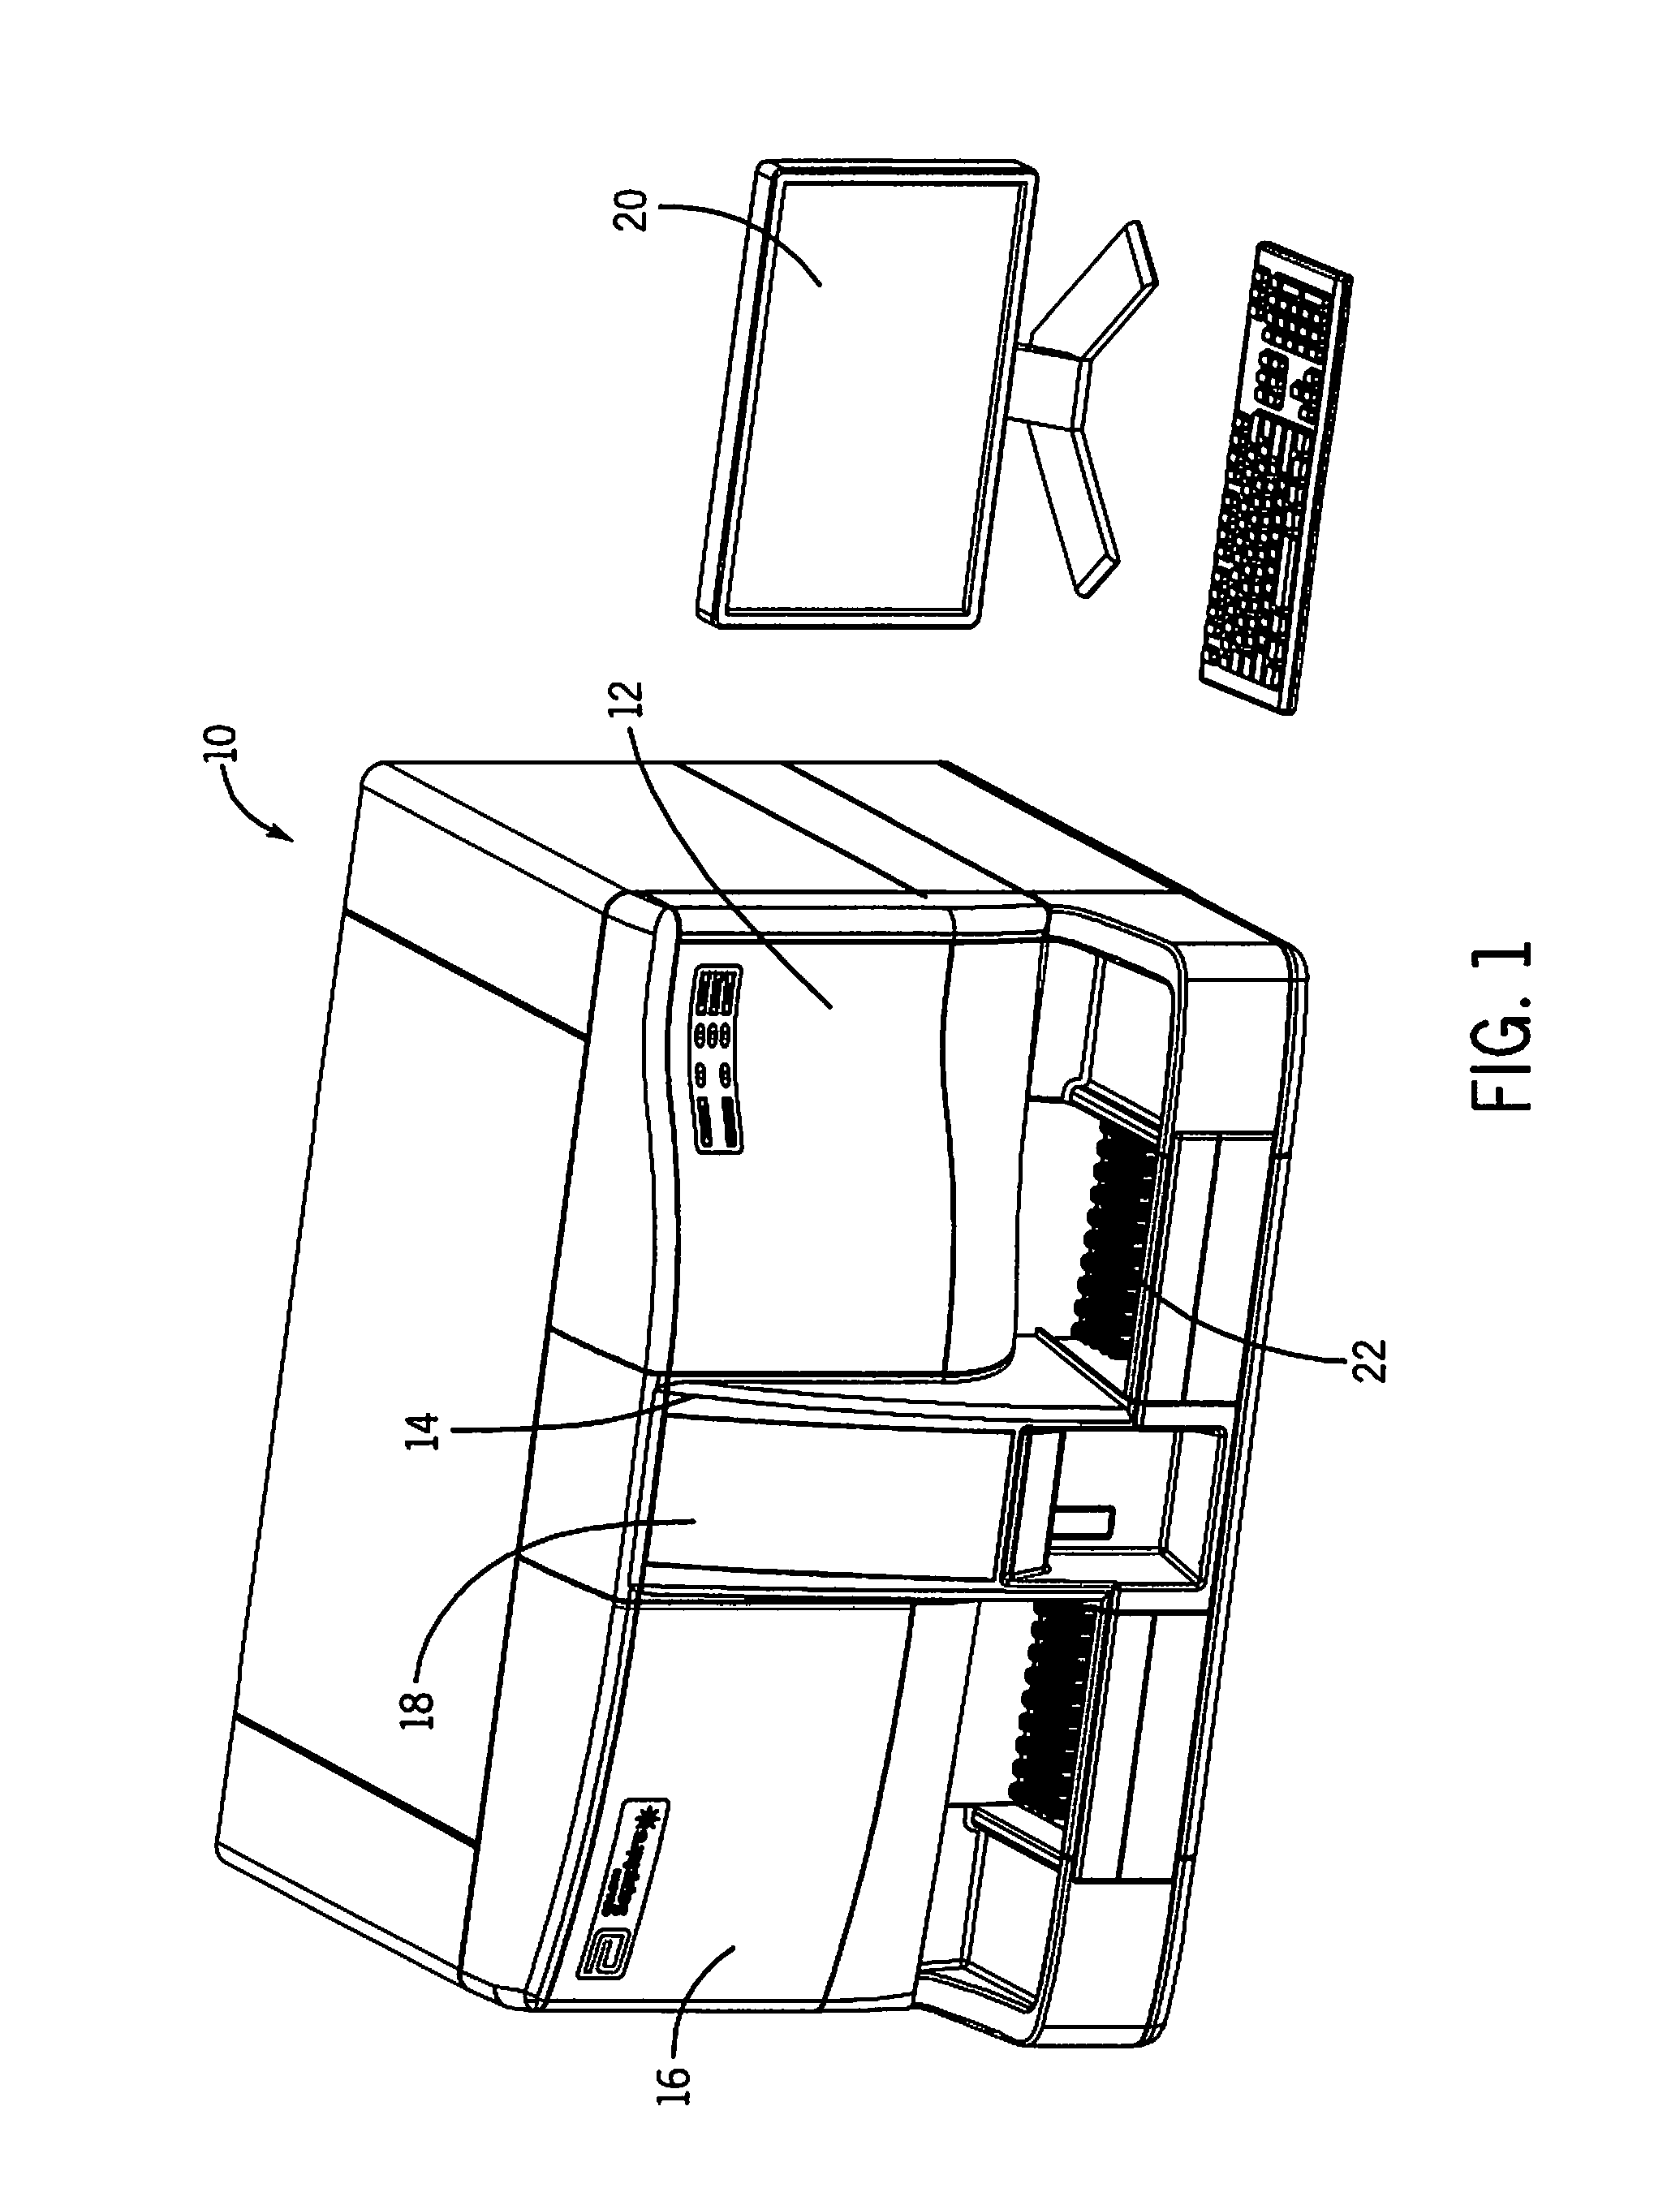 Automatic loading of sample tubes for clinical analyzer